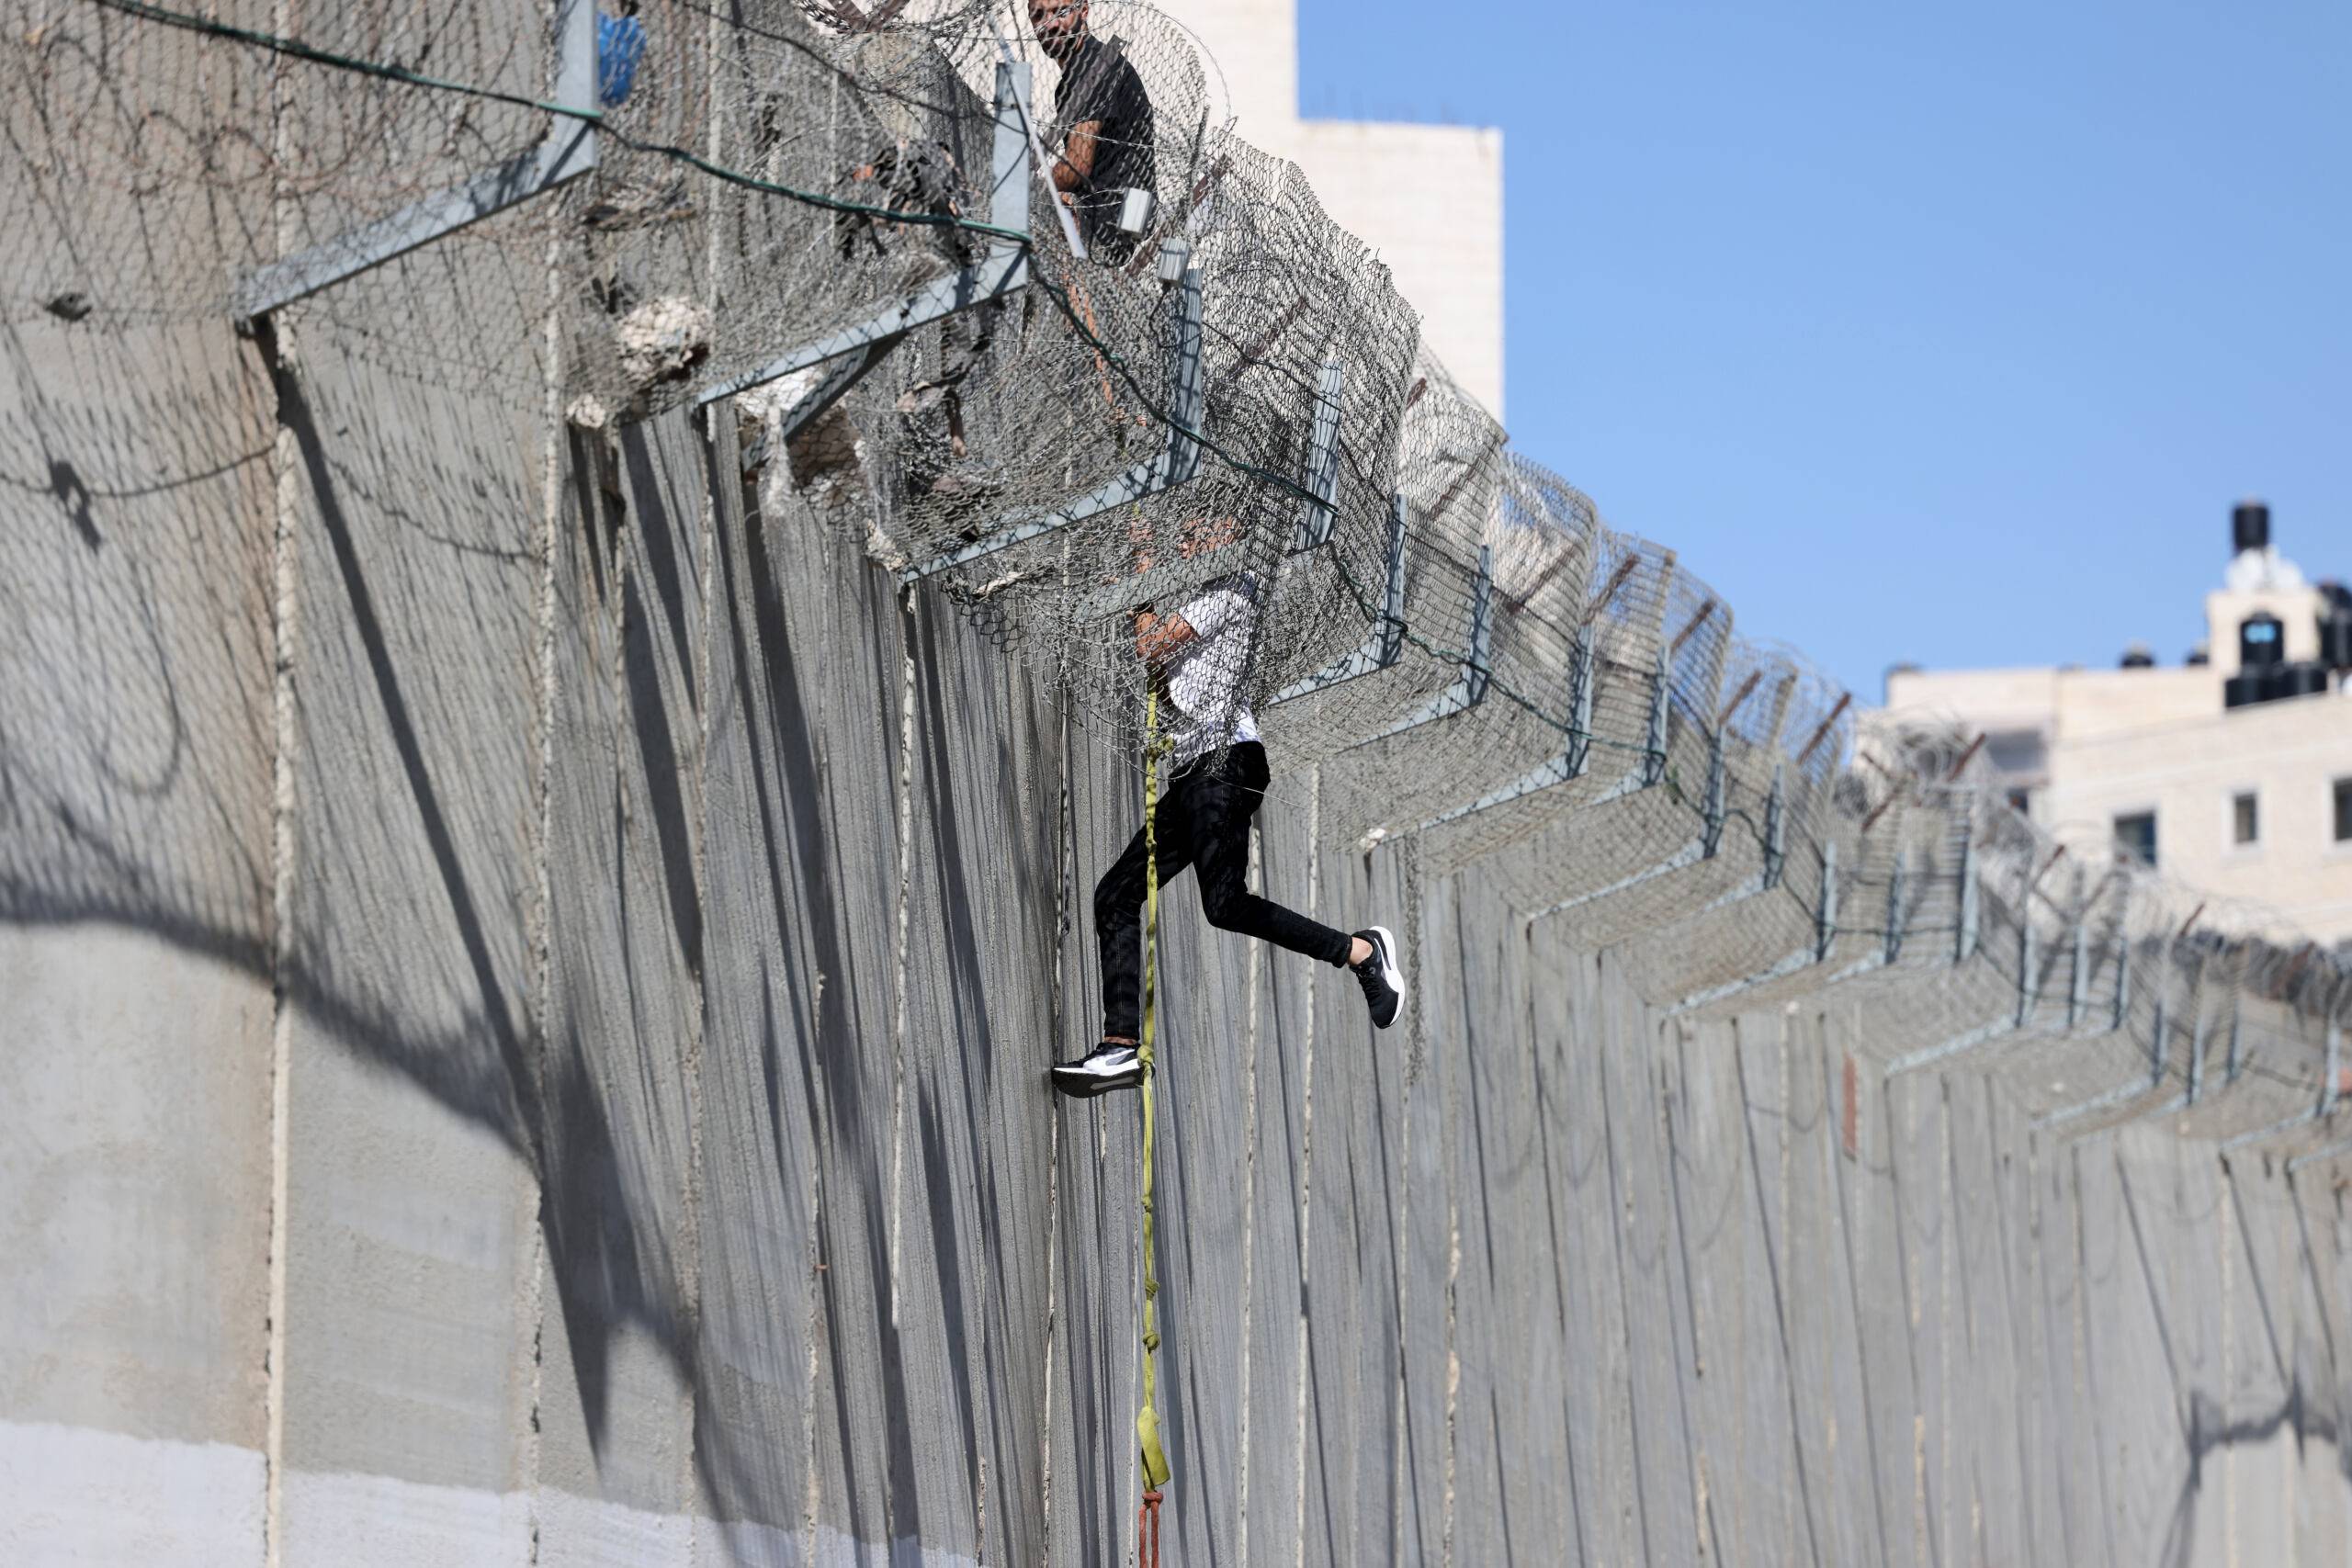 A youth descends on a rope across the concrete wall of Israel's controversial separation barrier into the East Jerusalem neighbourhood of Beit Hanina after having climbed and crossed over from the village of al-Ram, on July 11, 2022. (Photo by Ahmad GHARABLI / AFP)